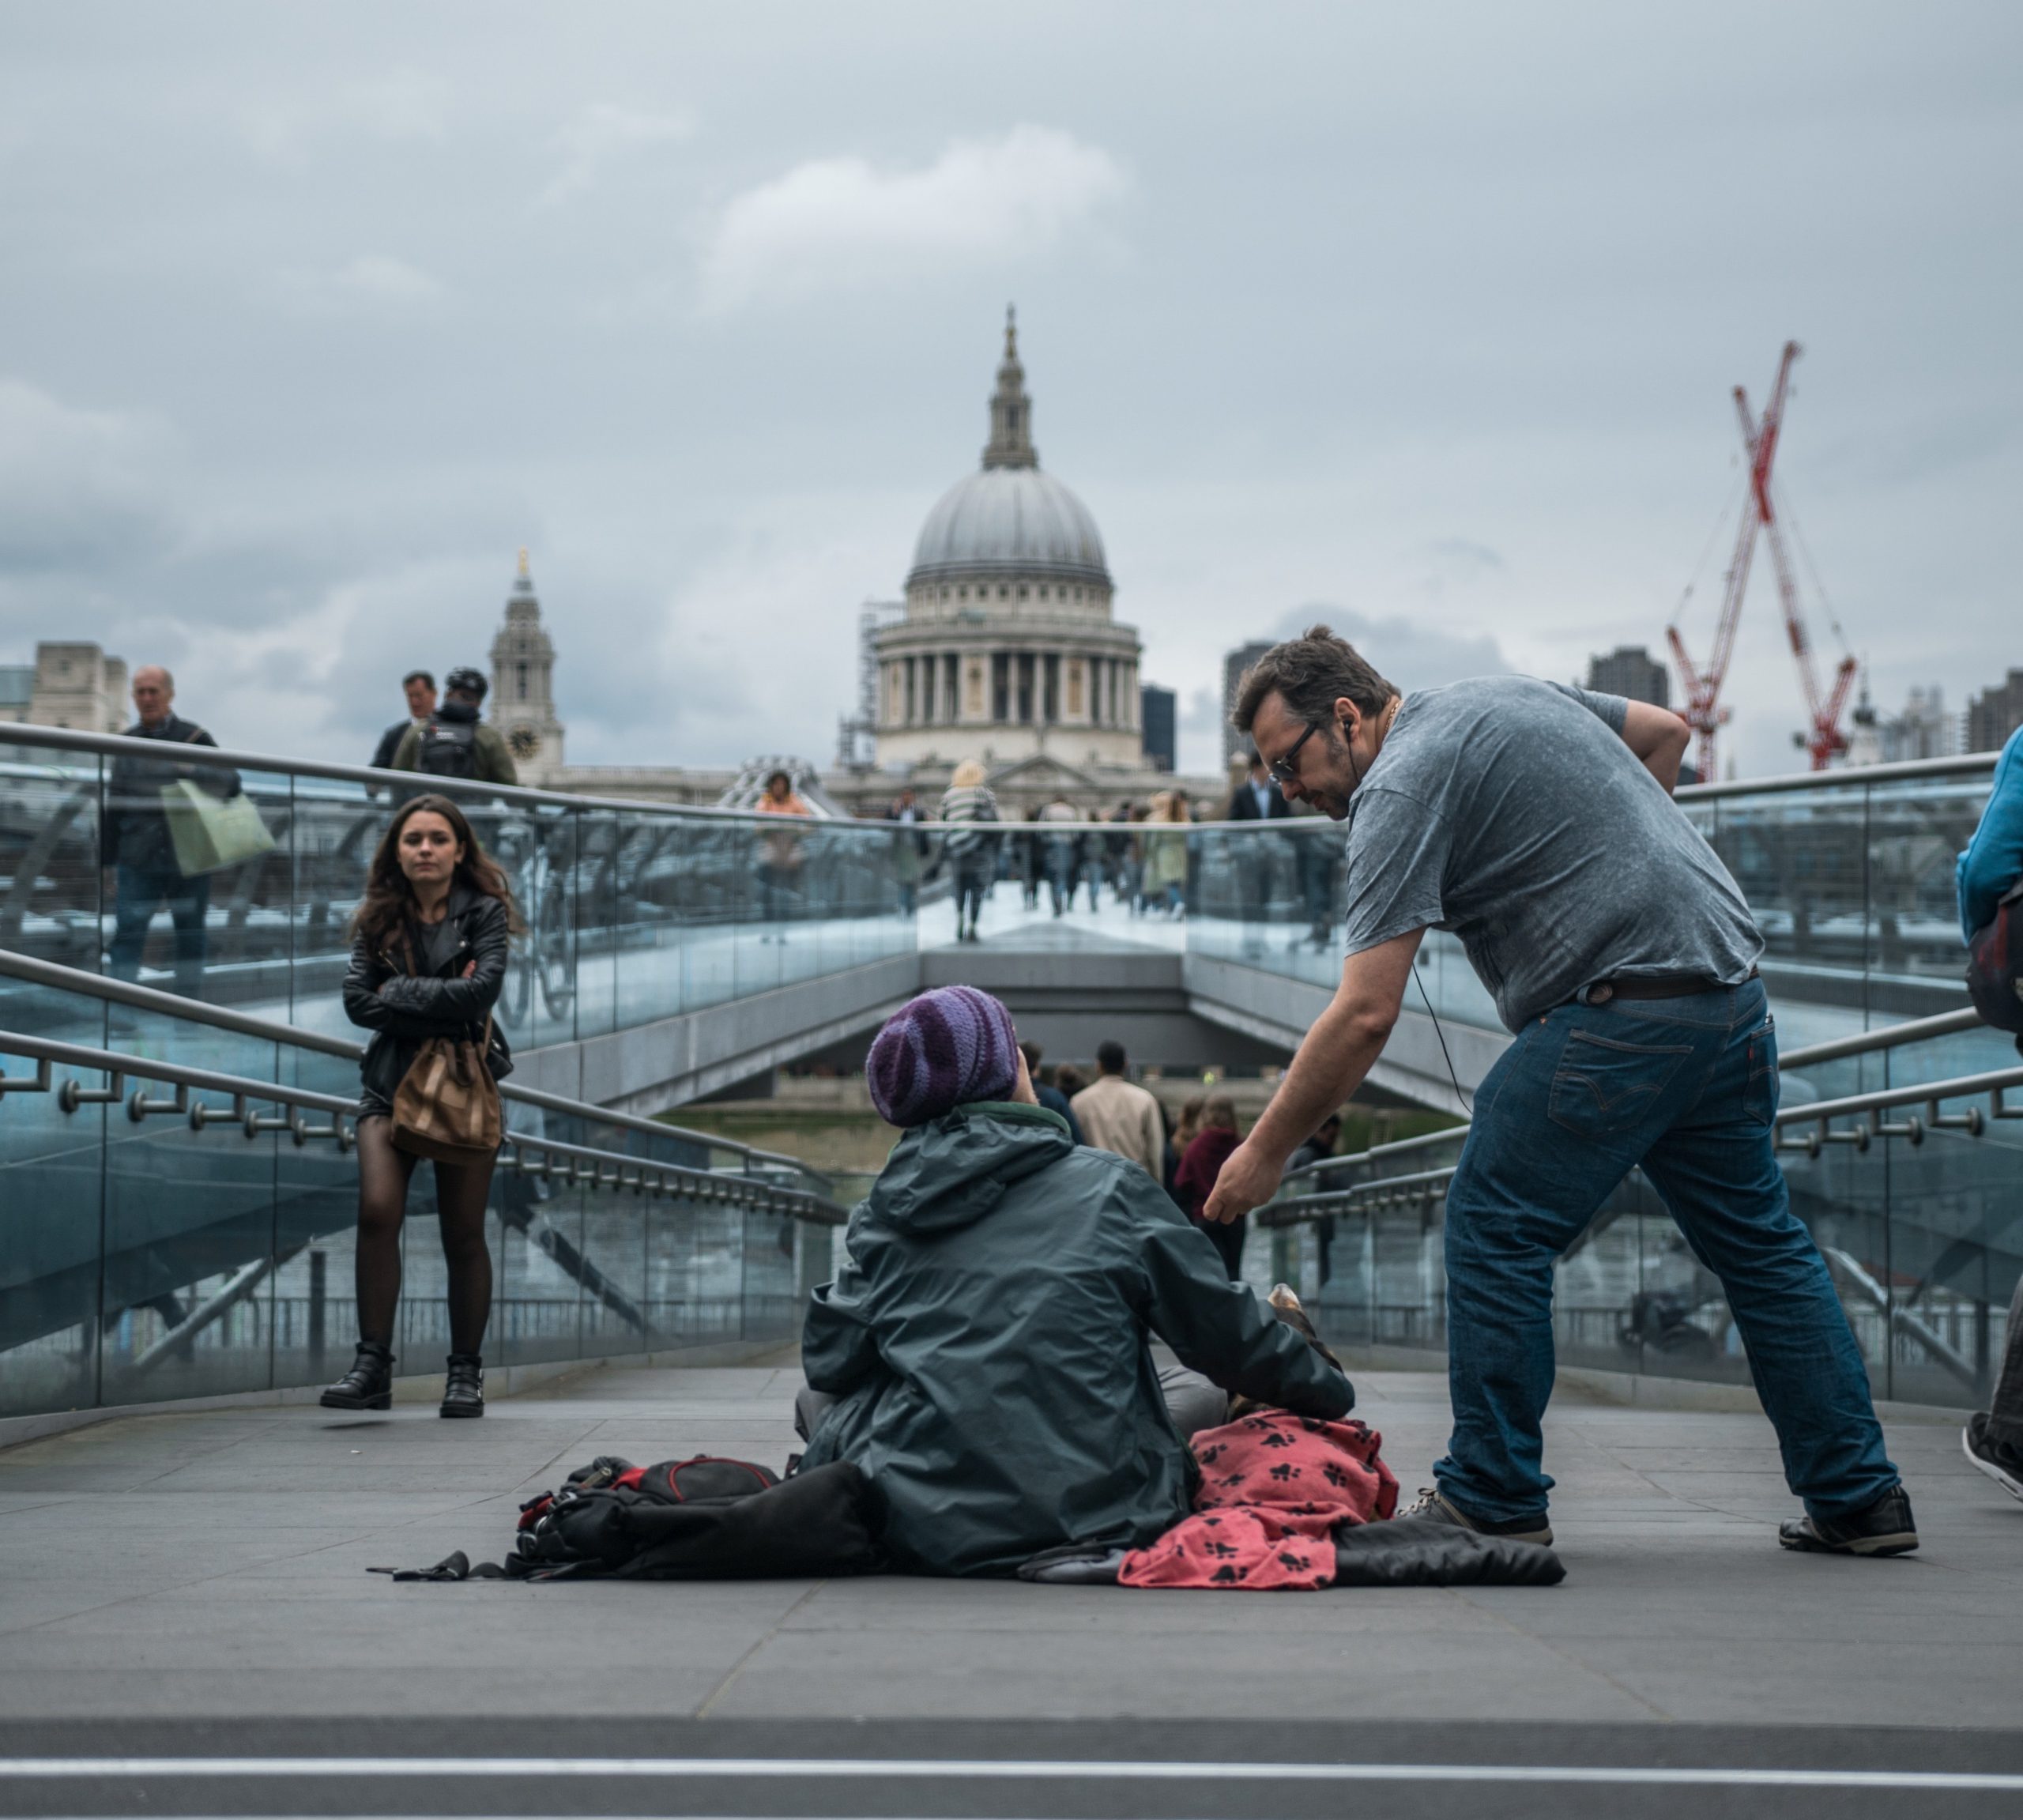 A homeless man sits on the end of London Bridge. He looks up while a passerby hands him some change.